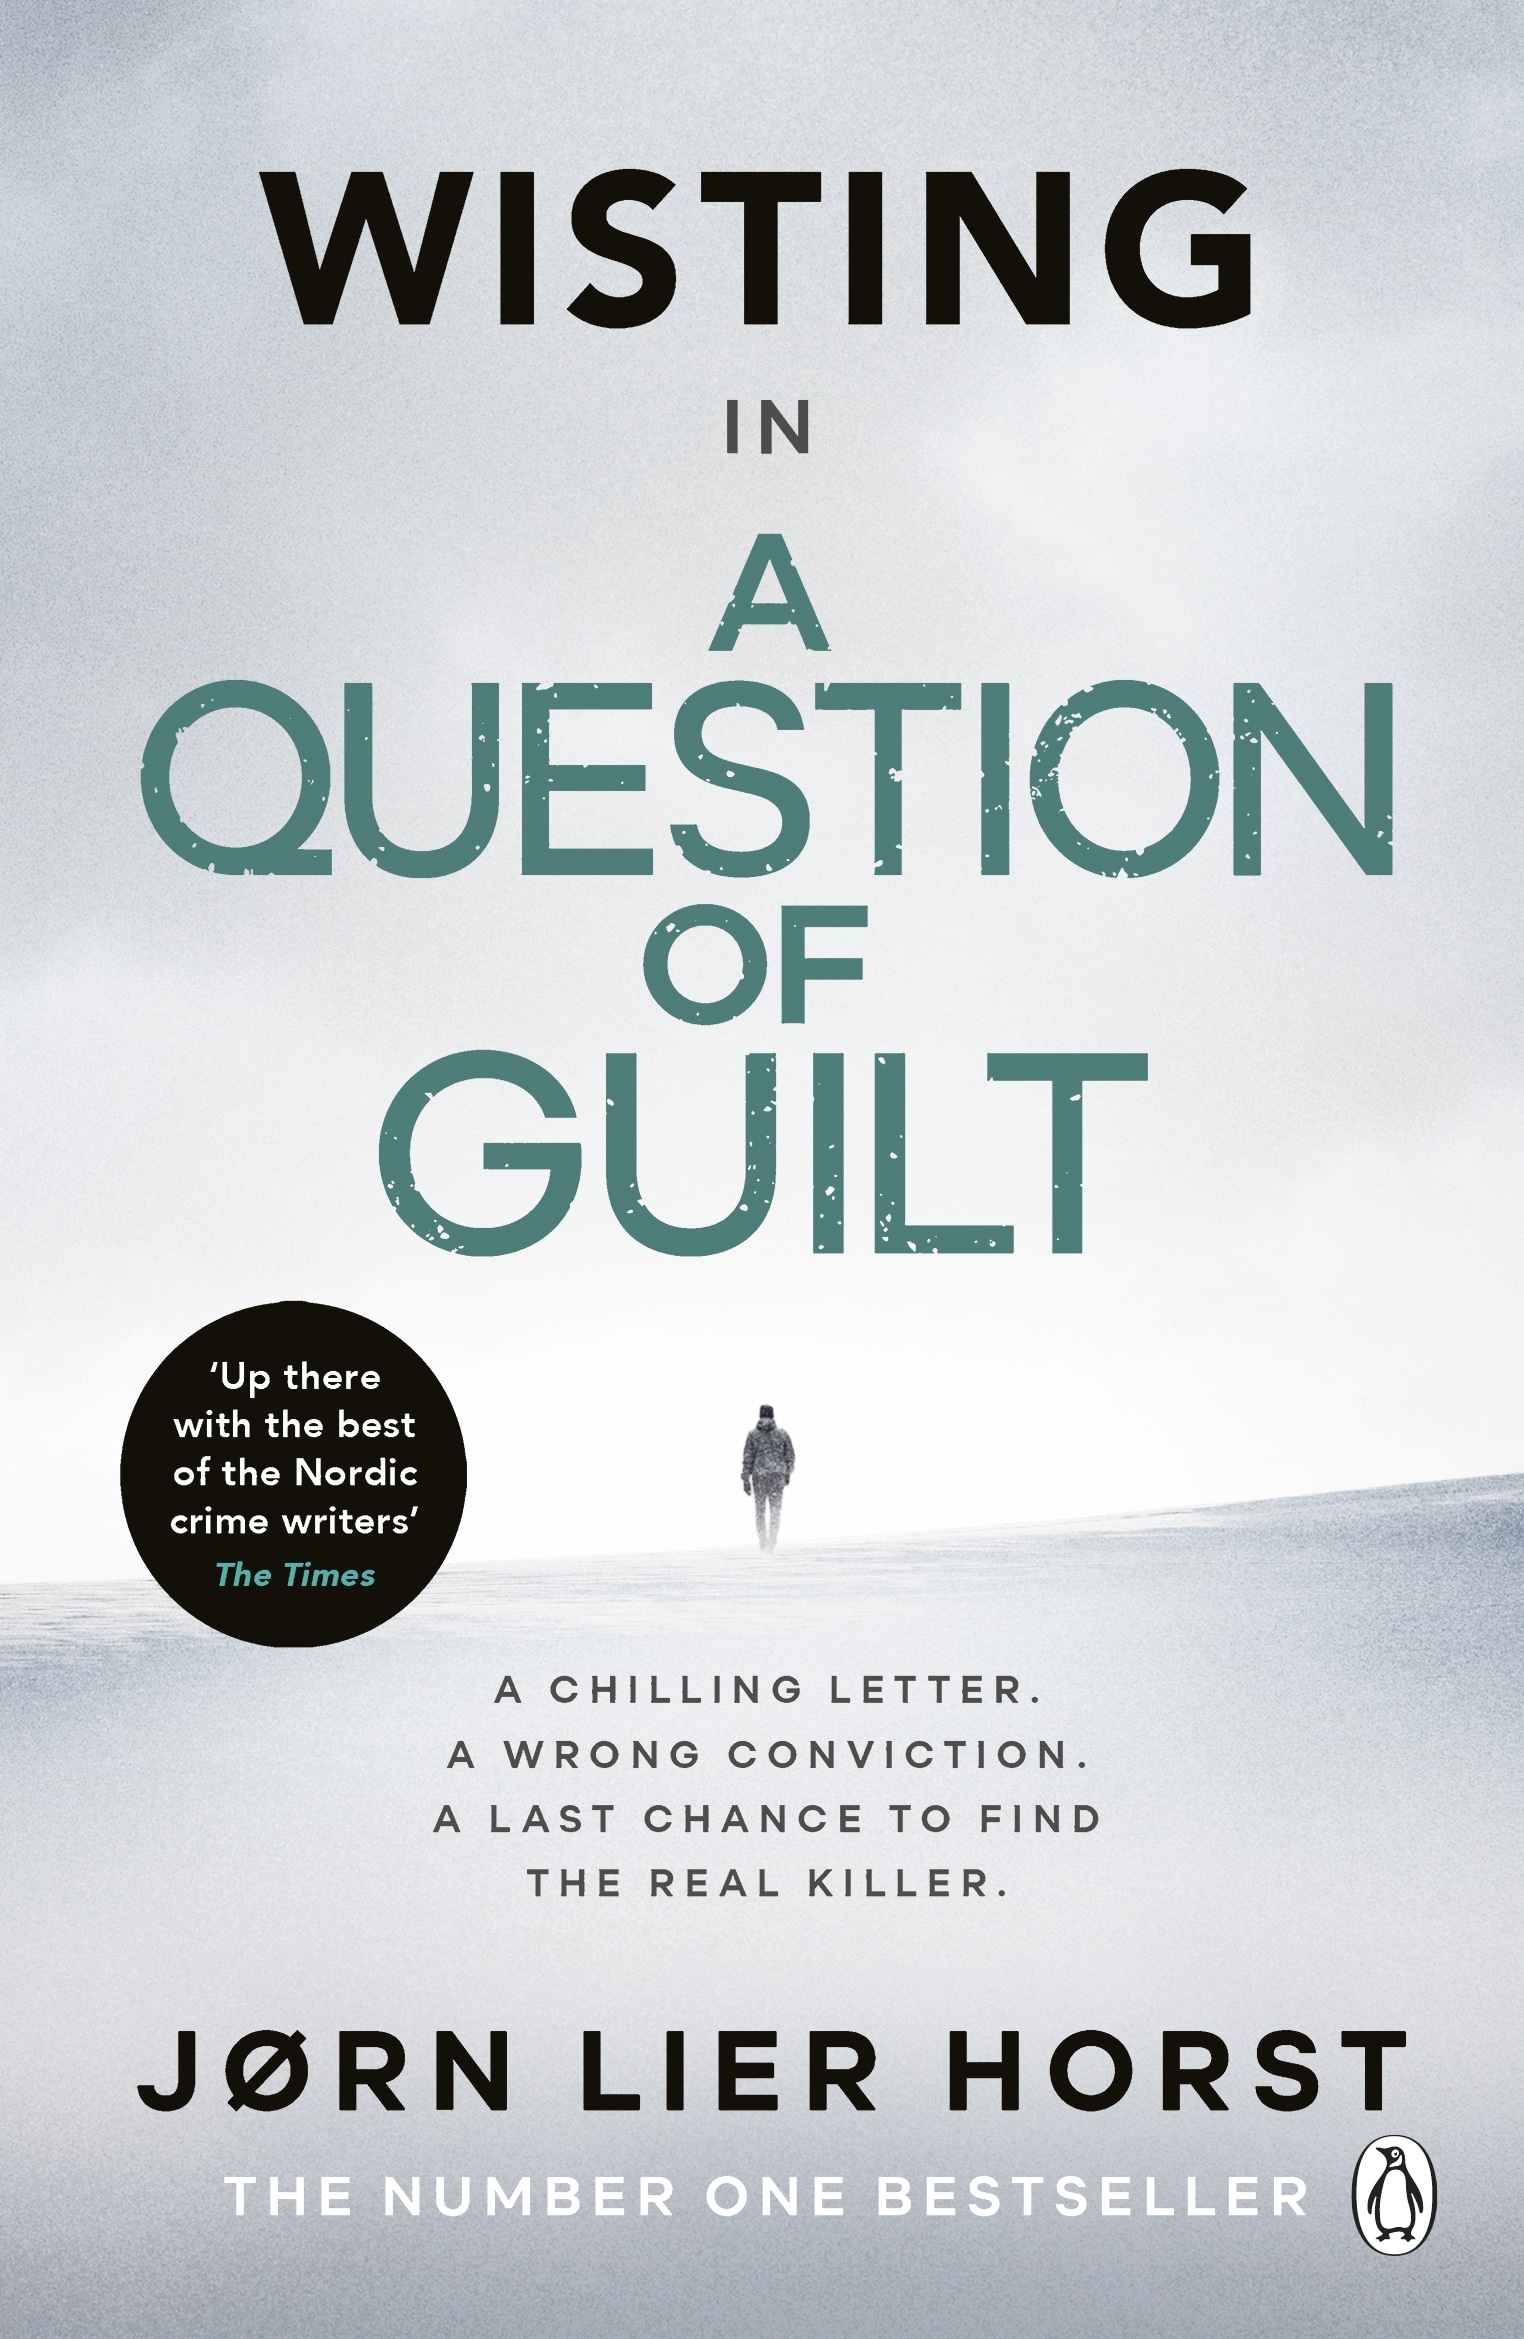 Book cover of A Question of Guilty by Jorn Lier Horst